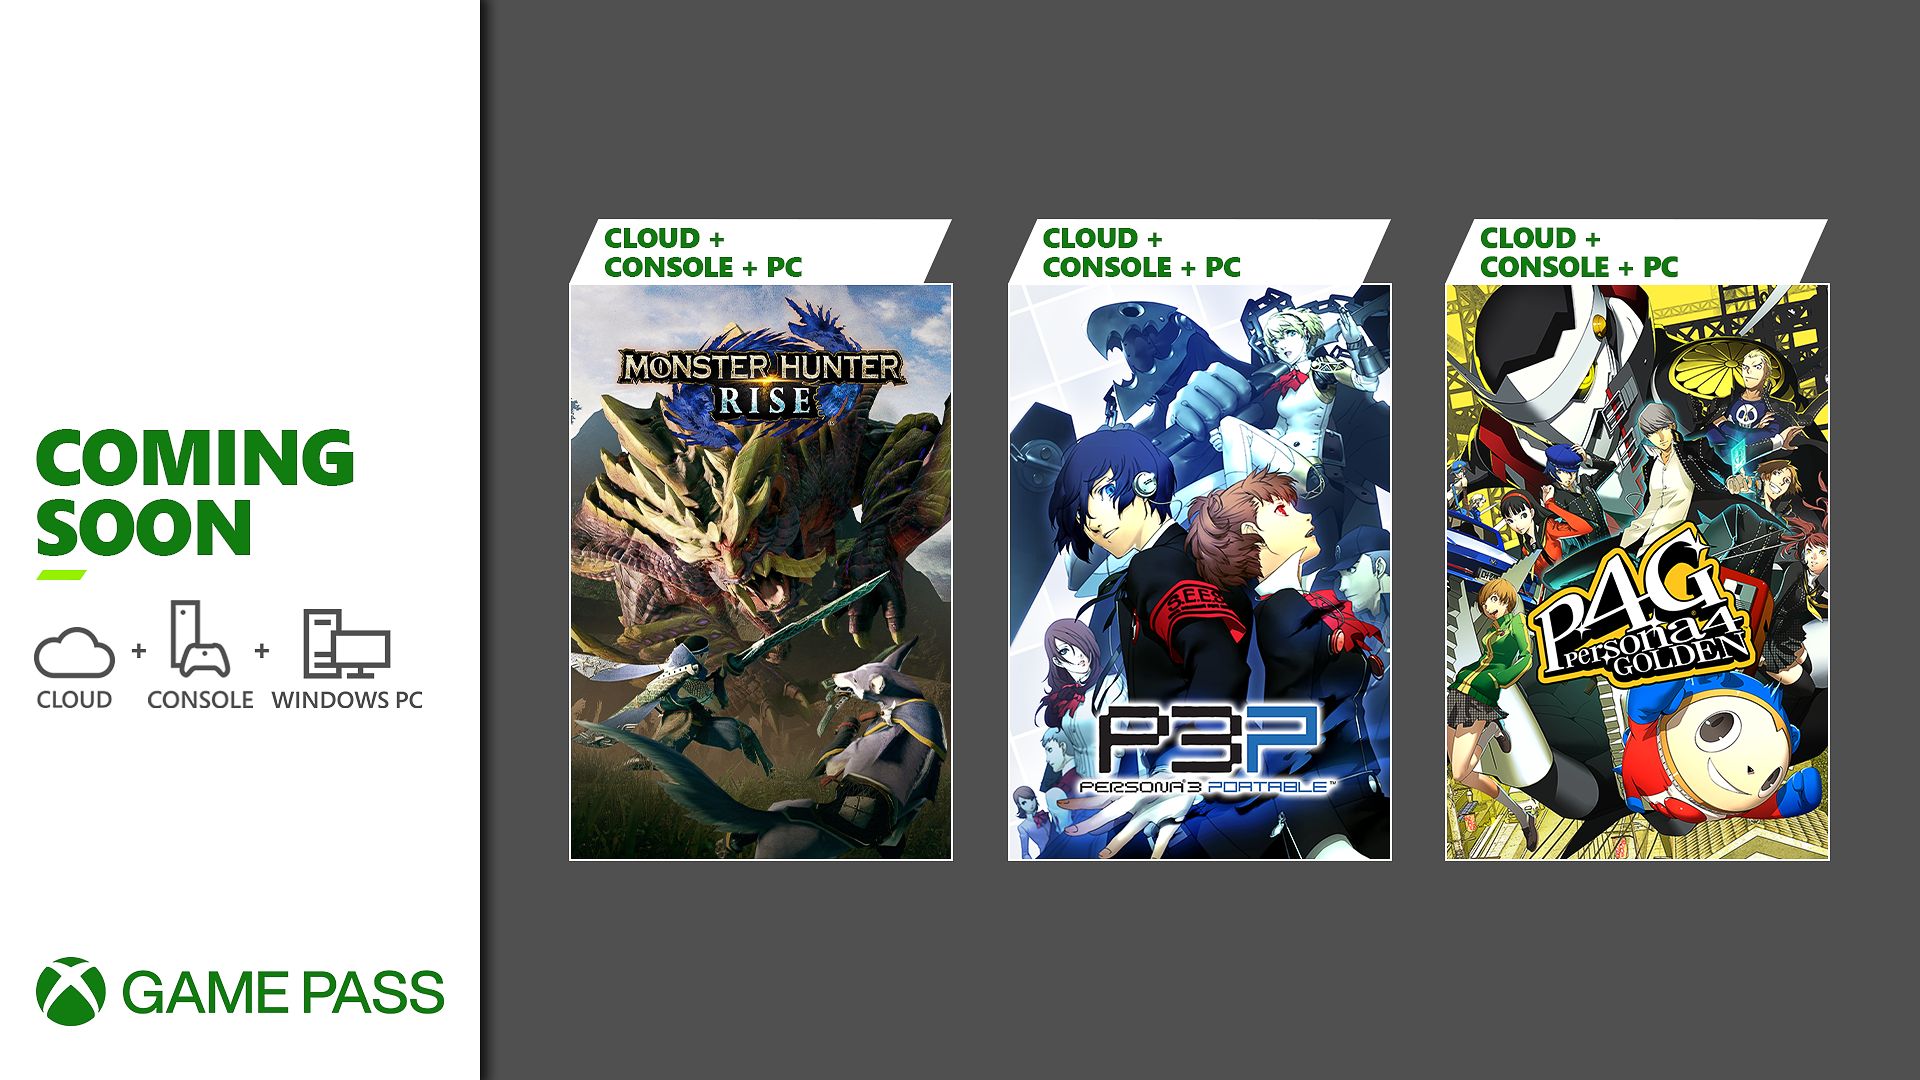 Coming to Xbox Game Pass: Monster Hunter Rise, Persona 3 Portable, and Persona 4 Golden